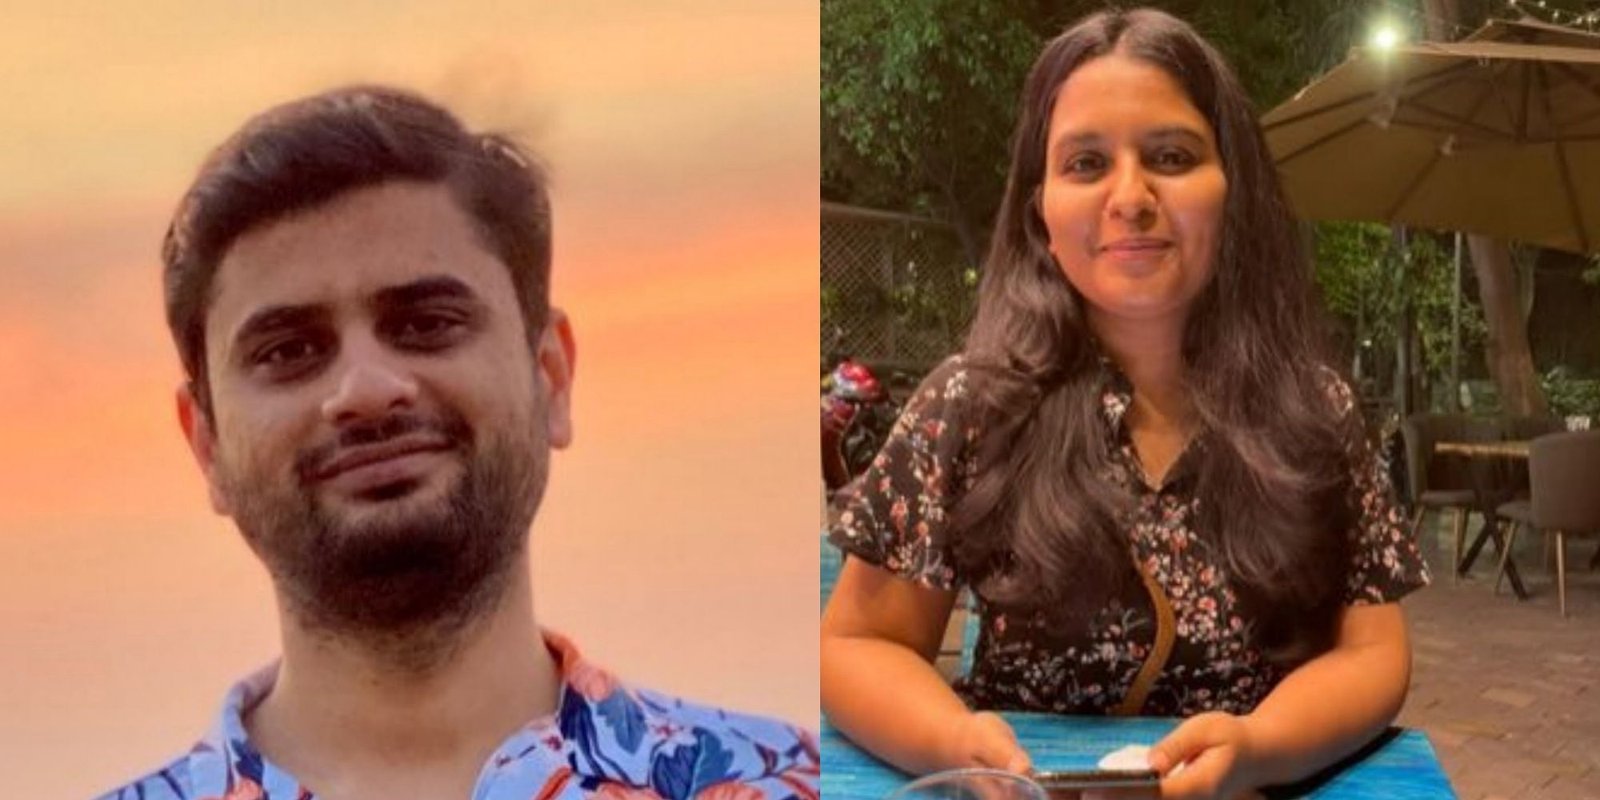 The Pune based couple is giving out money grants of Rs 50,000 to individuals under the age of 25 to fulfill their dreams